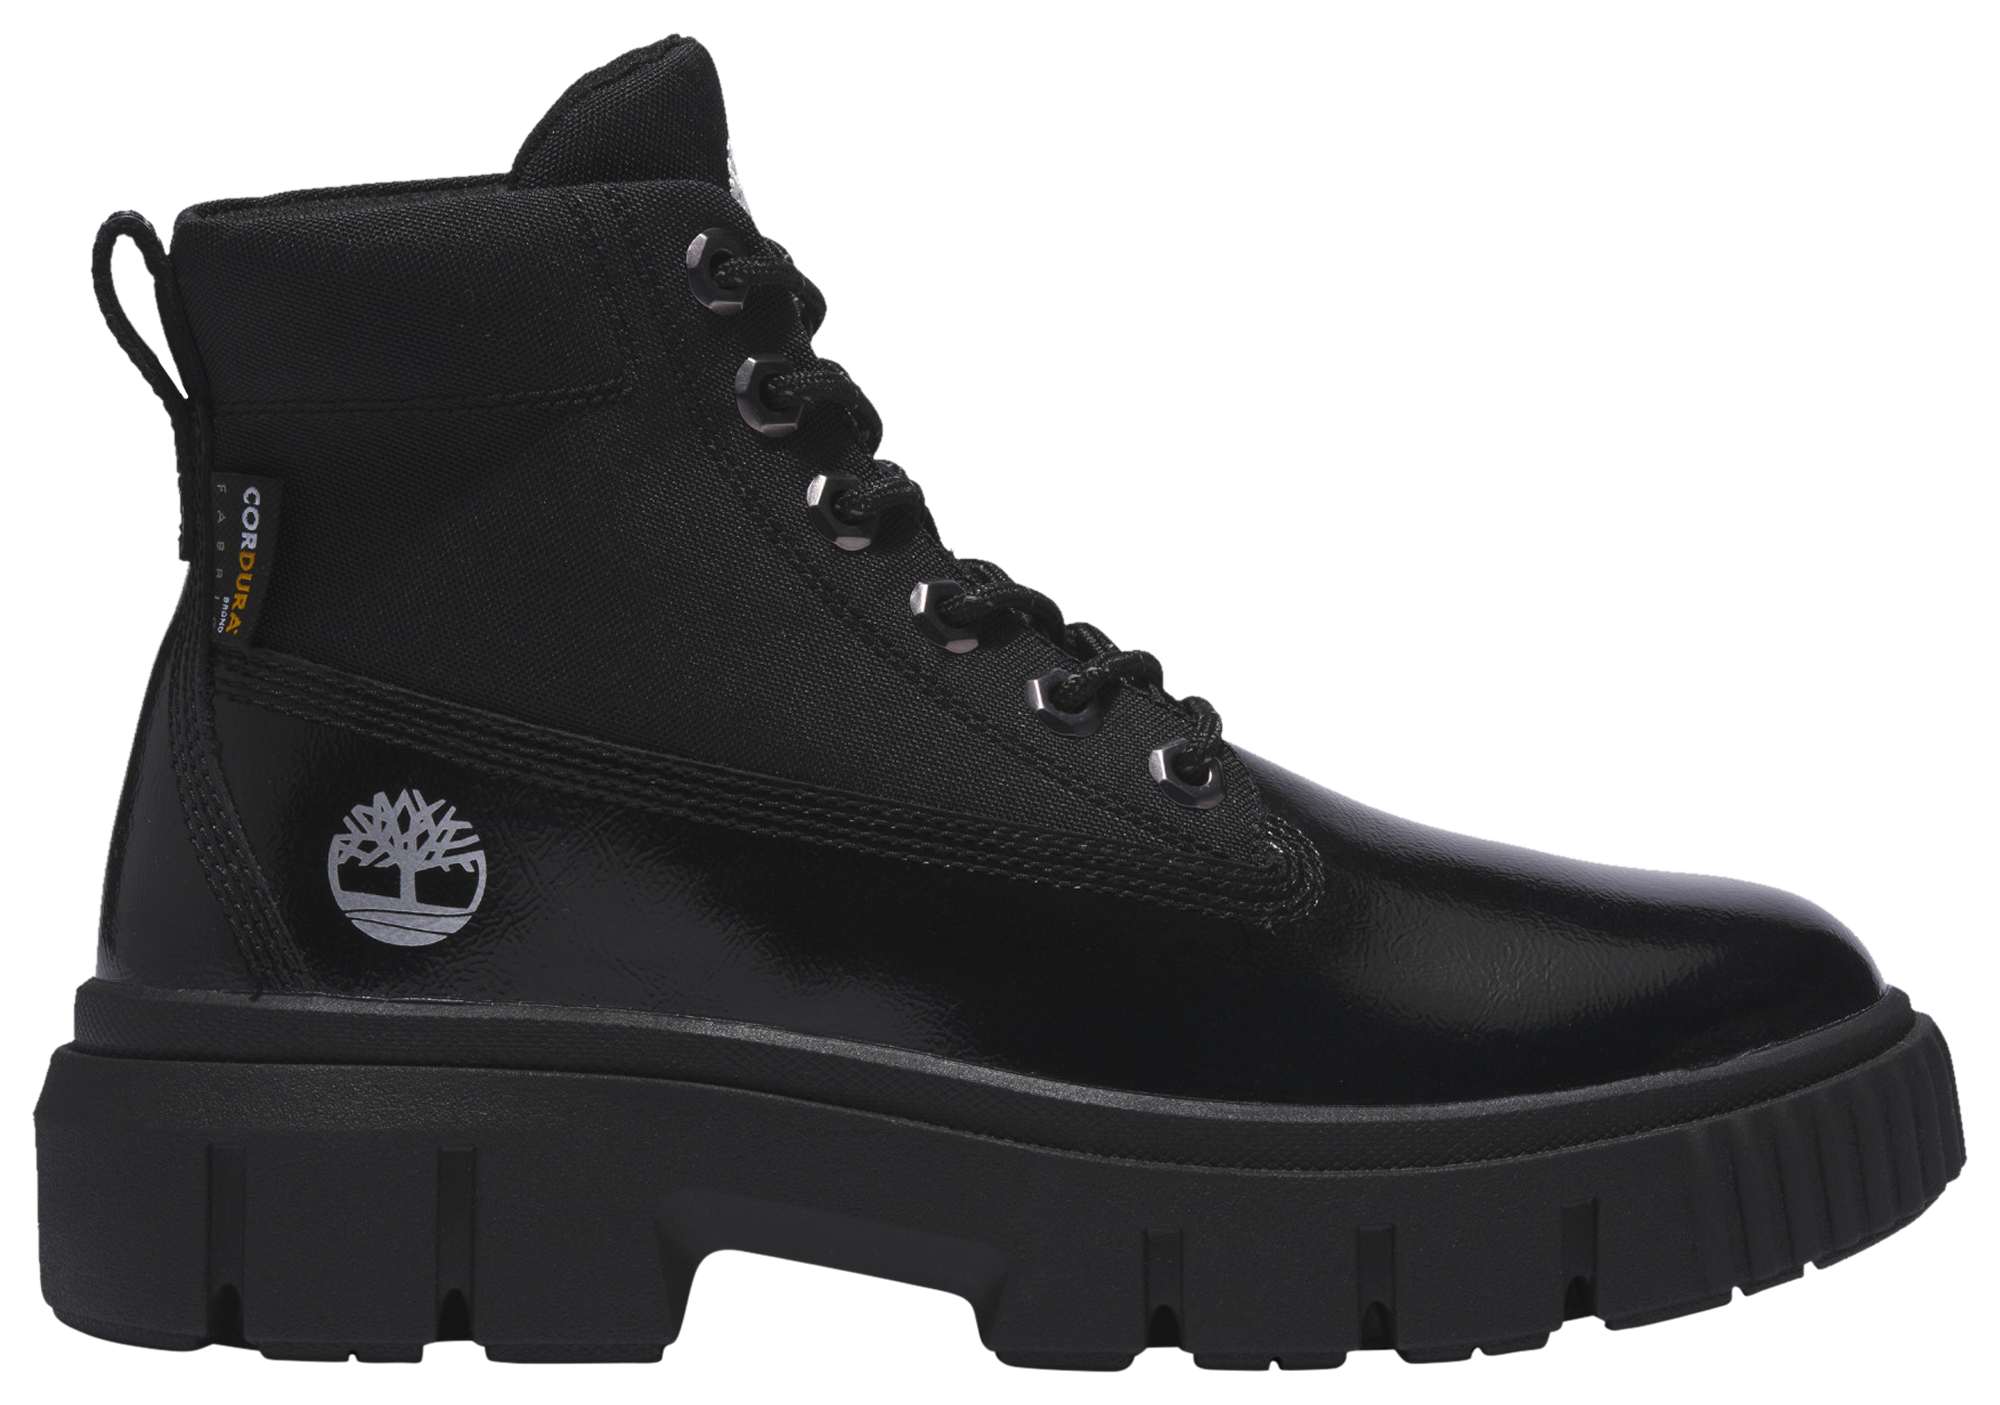 Timberland Greyfield Shiny Suede Boots | Champs Sports Canada